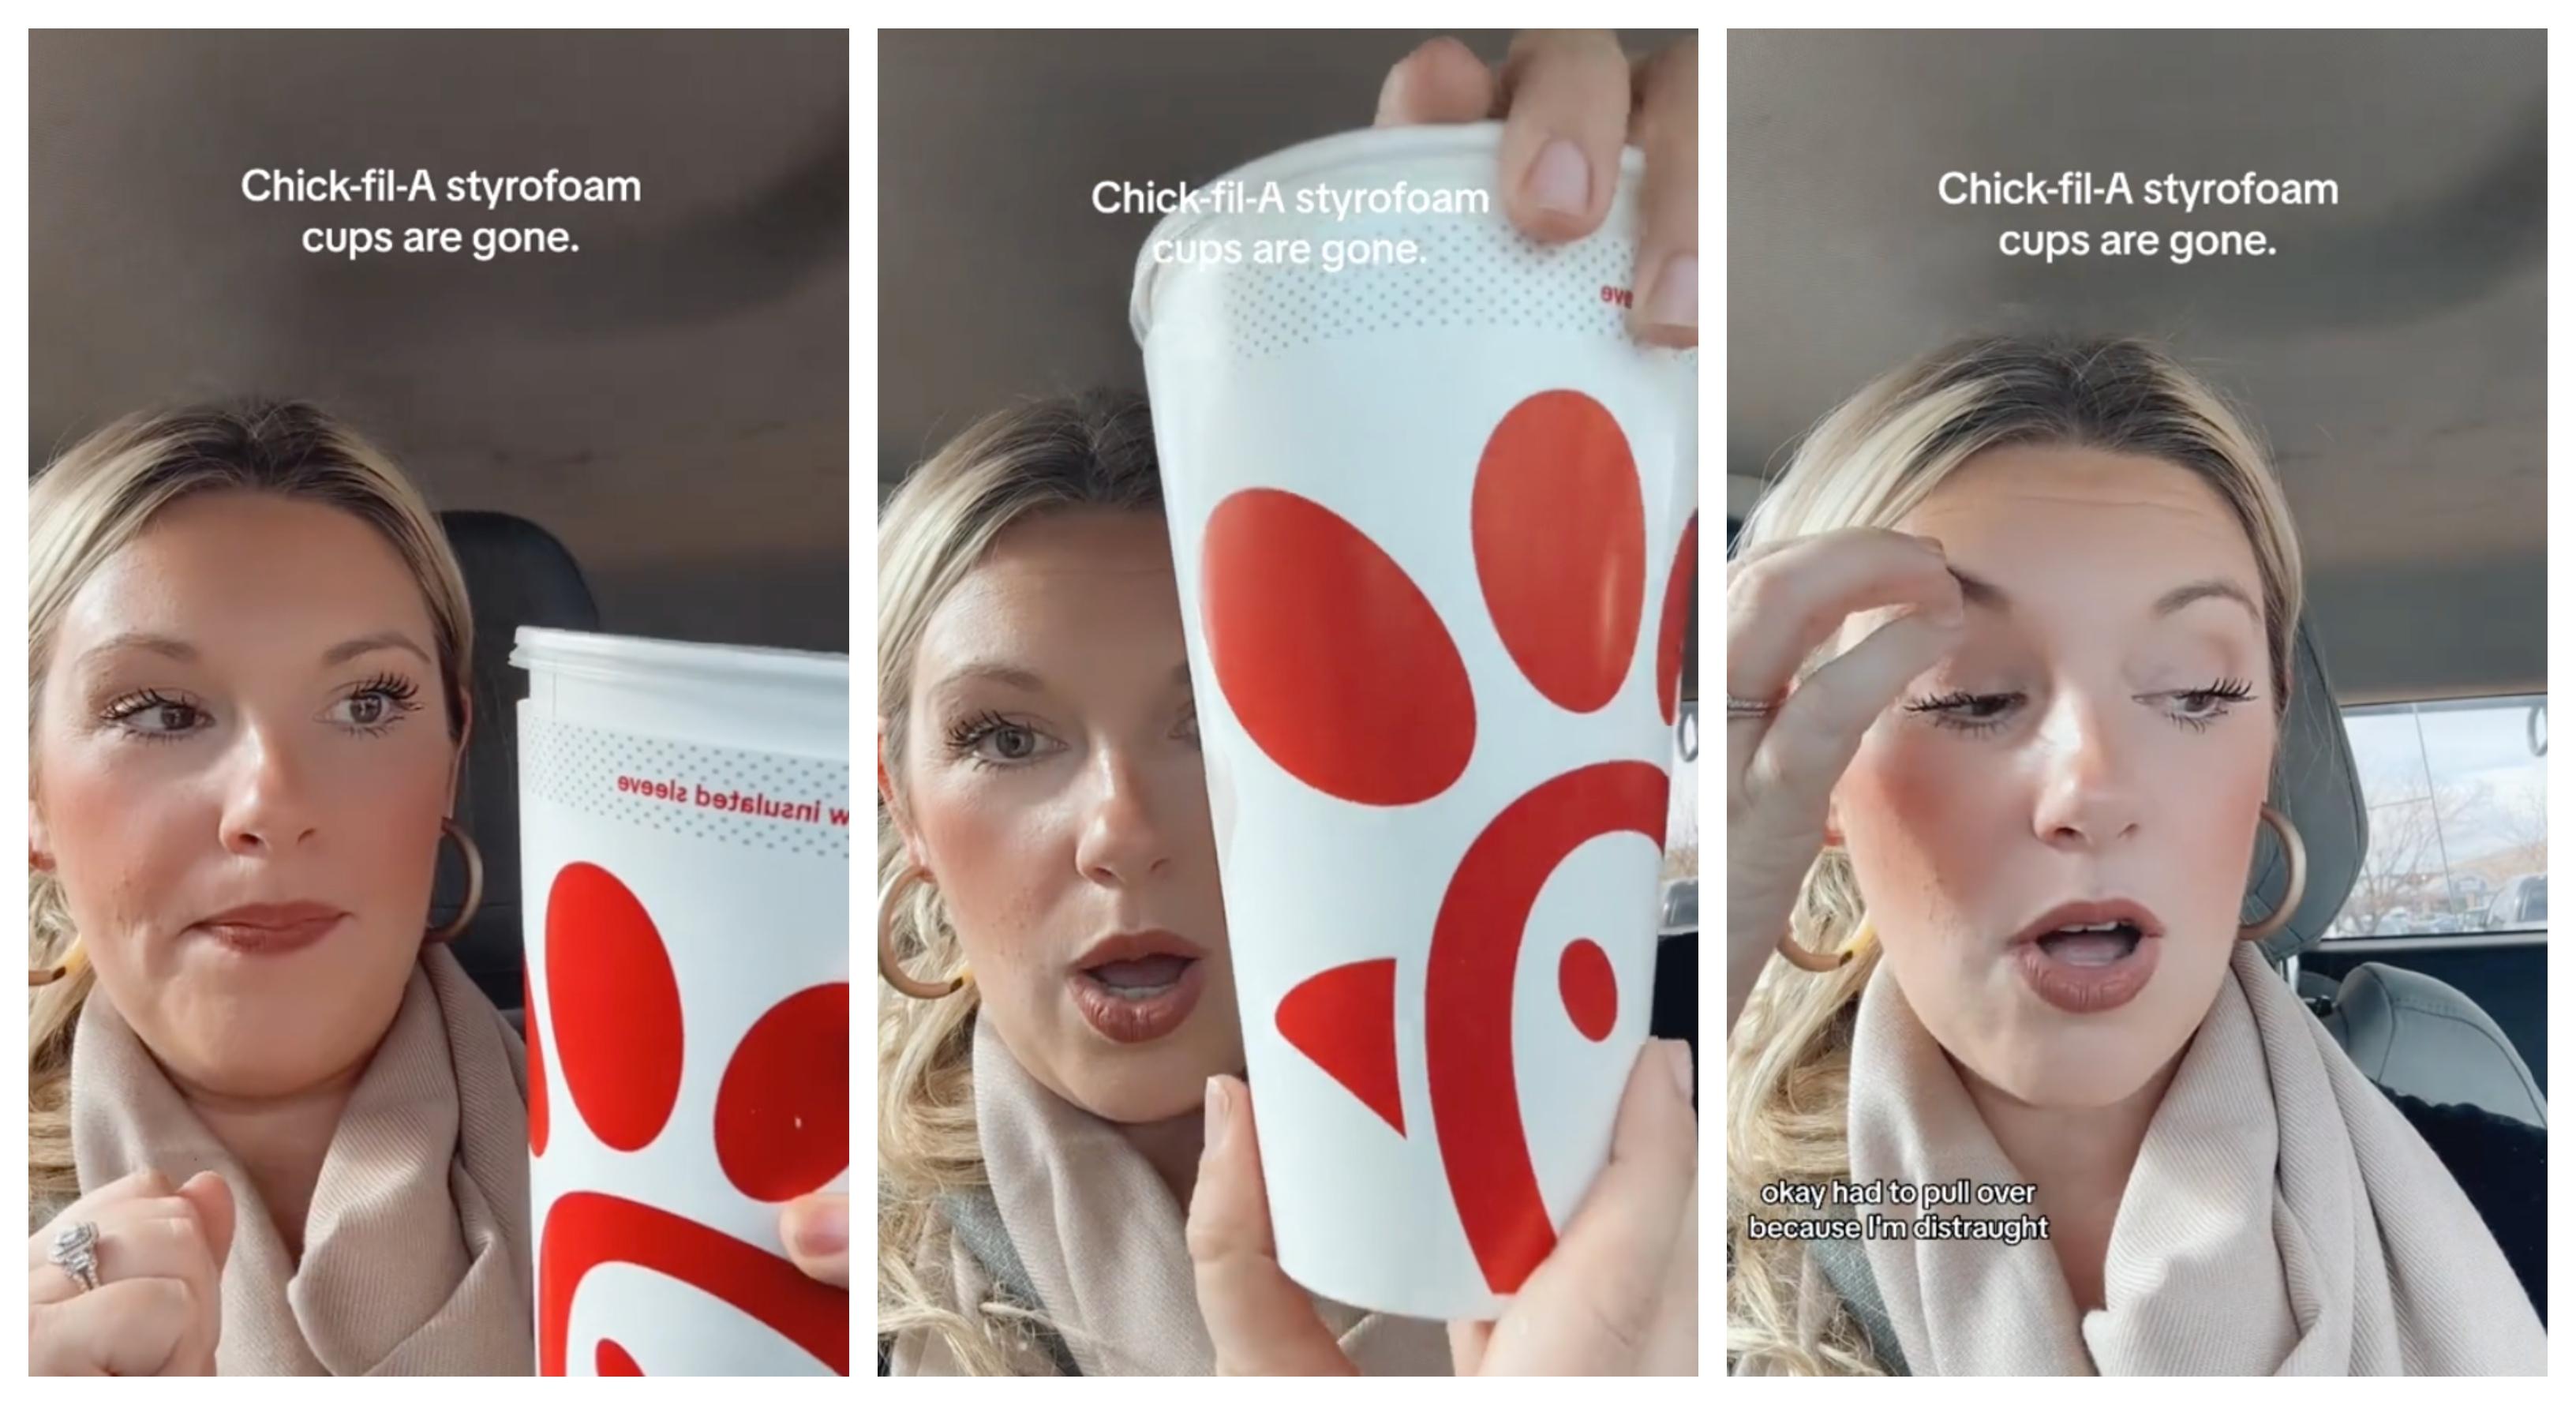 Chick-fil-A Is Replacing Styrofoam Cups, People Aren't Happy